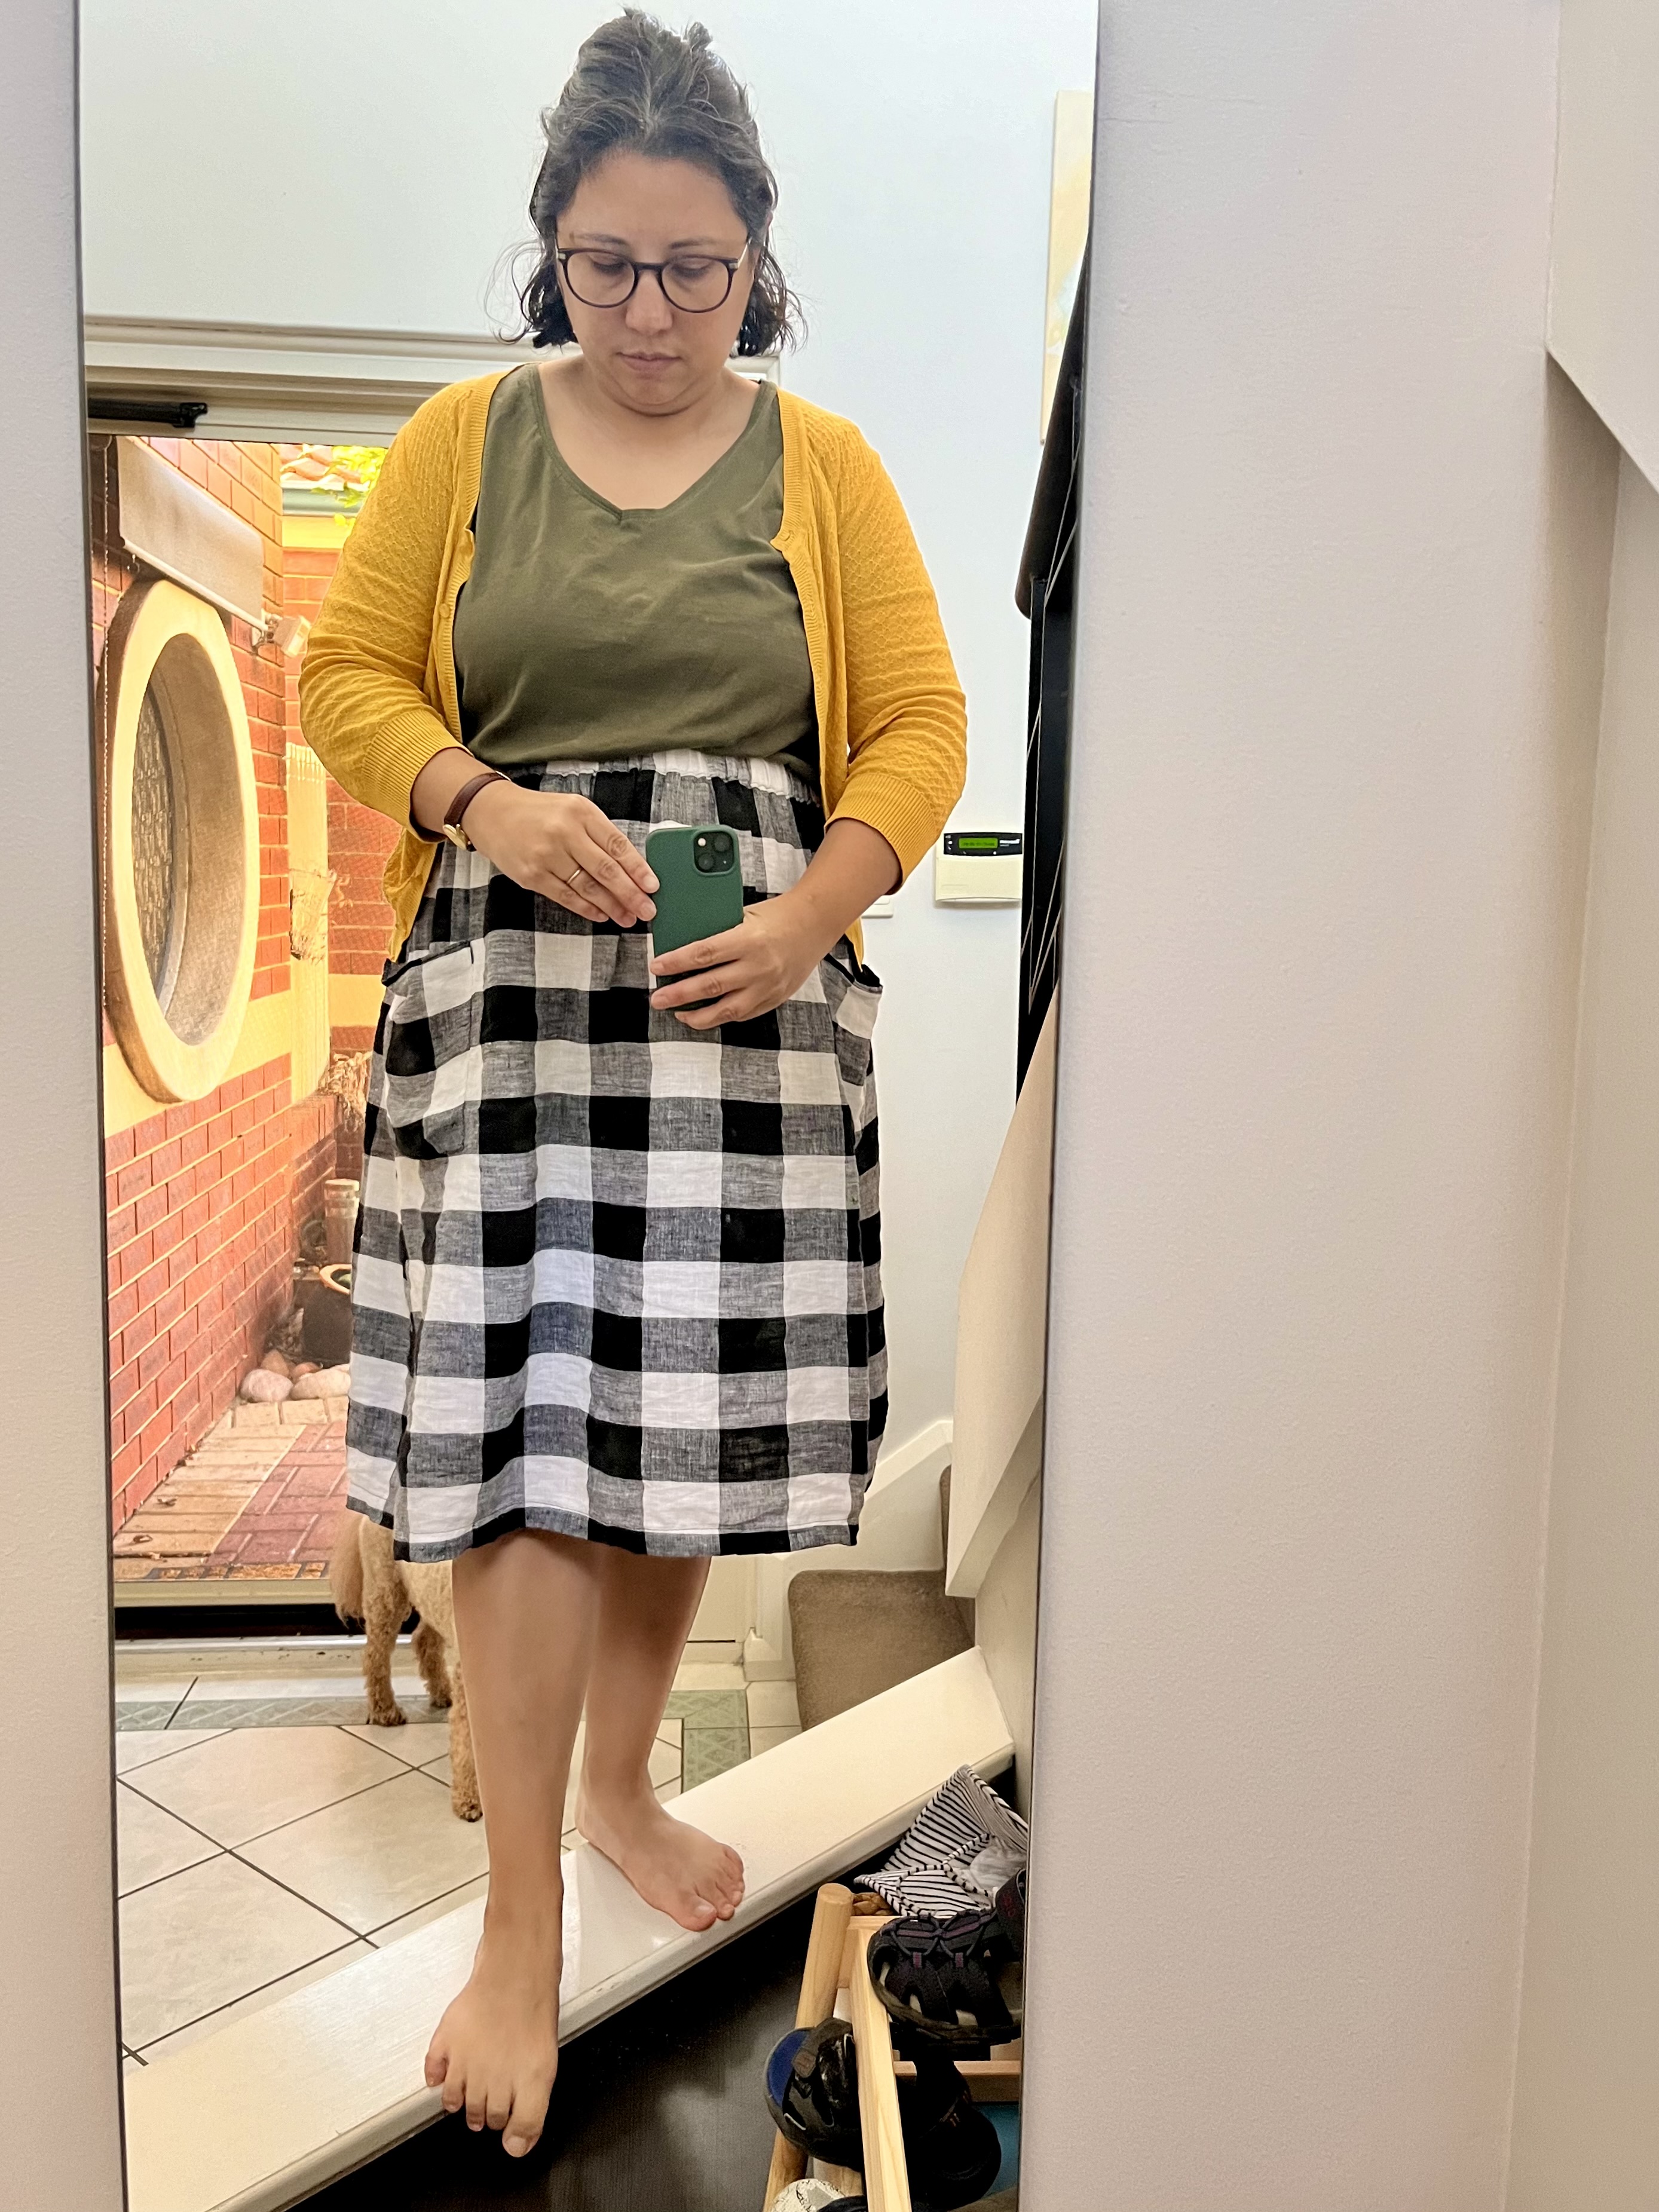 IMG_2284 1.jpeg|photo of me wearing my Trapezoid skirt in black and white gingham